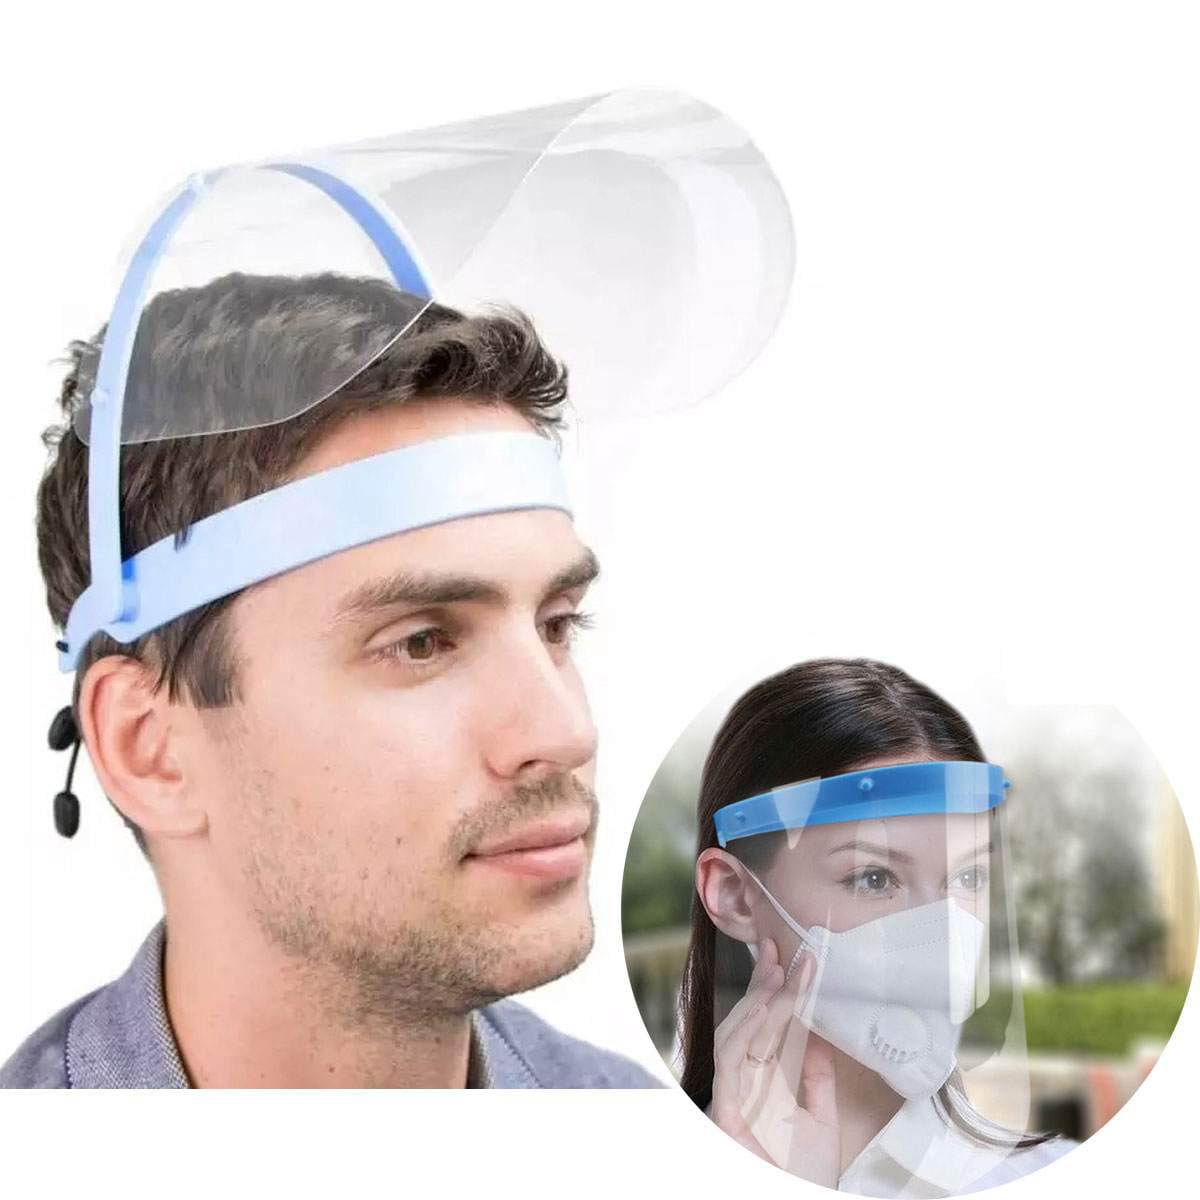 Exceart Safety Face Shield Anti Fog Splash Full Face Shield Clear Plastic Visor Eye Head Face Protection for Outdoor Office Kitchen